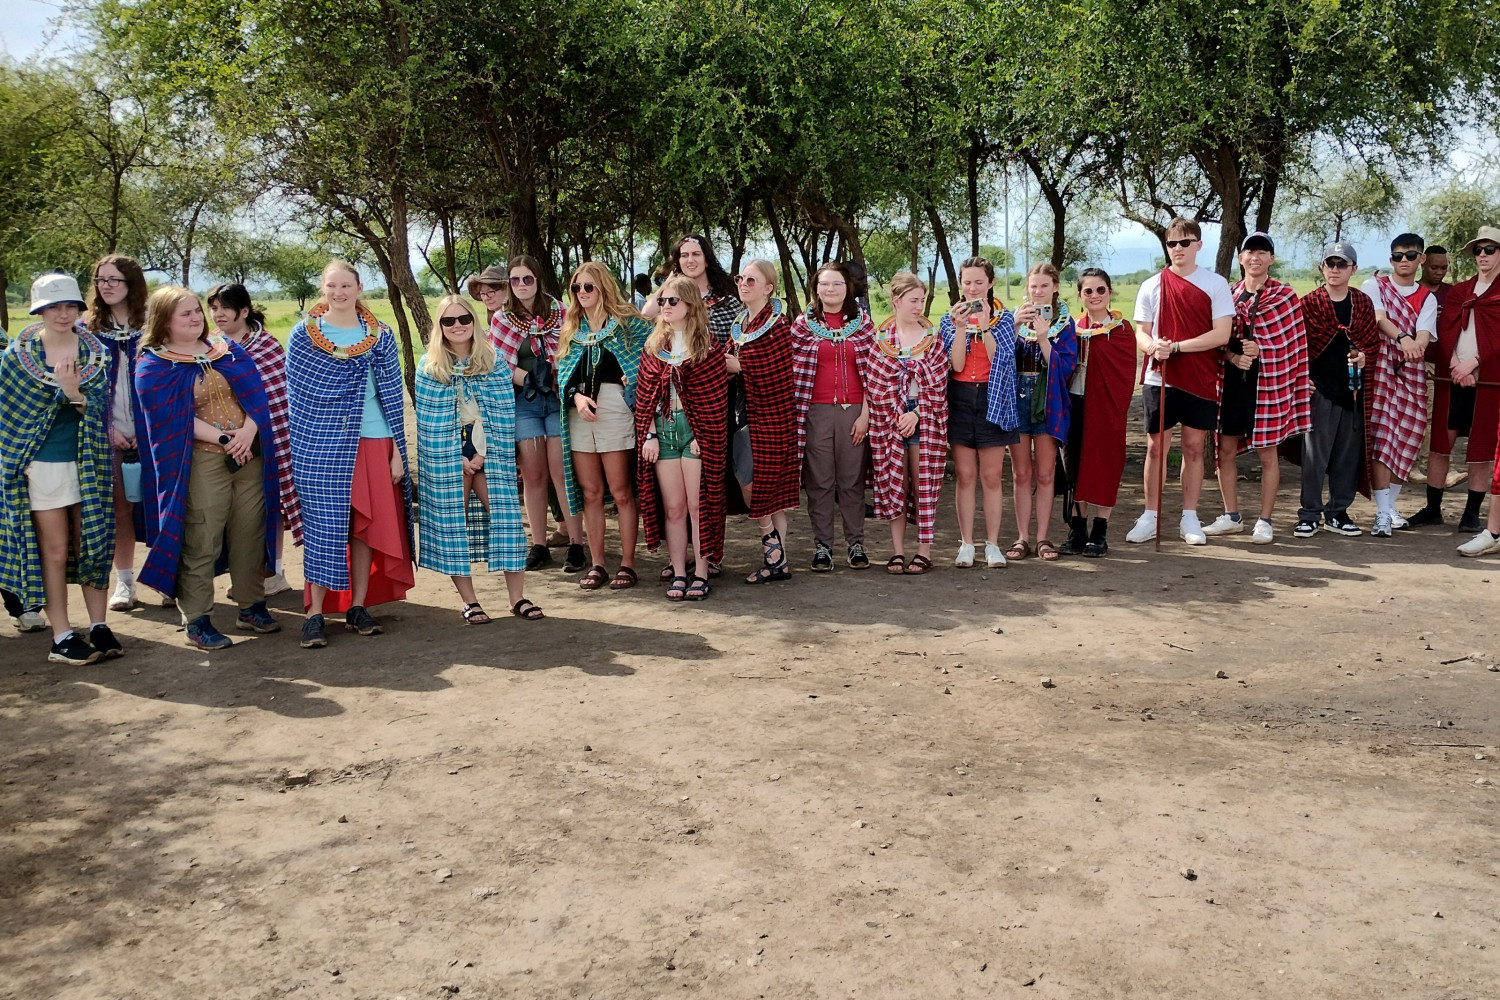 Students dressed in Maasai traditional clothing in Arusha, Tanzania.